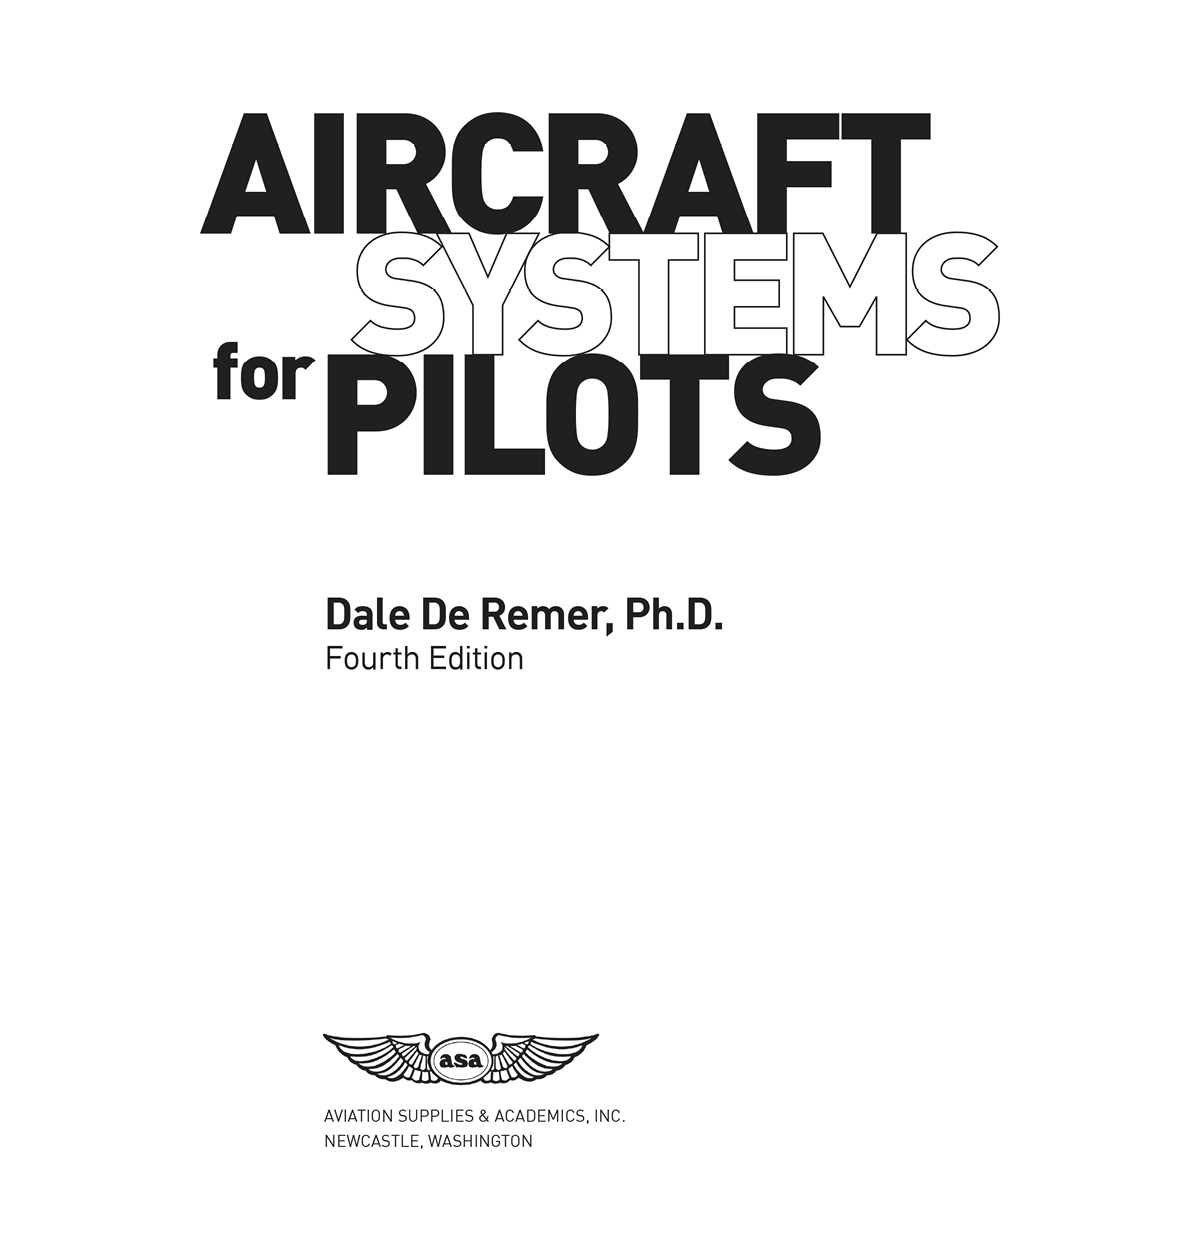 Aircraft Systems for Pilots Fourth Edition by Dale De Remer Aviation Supplies - photo 2